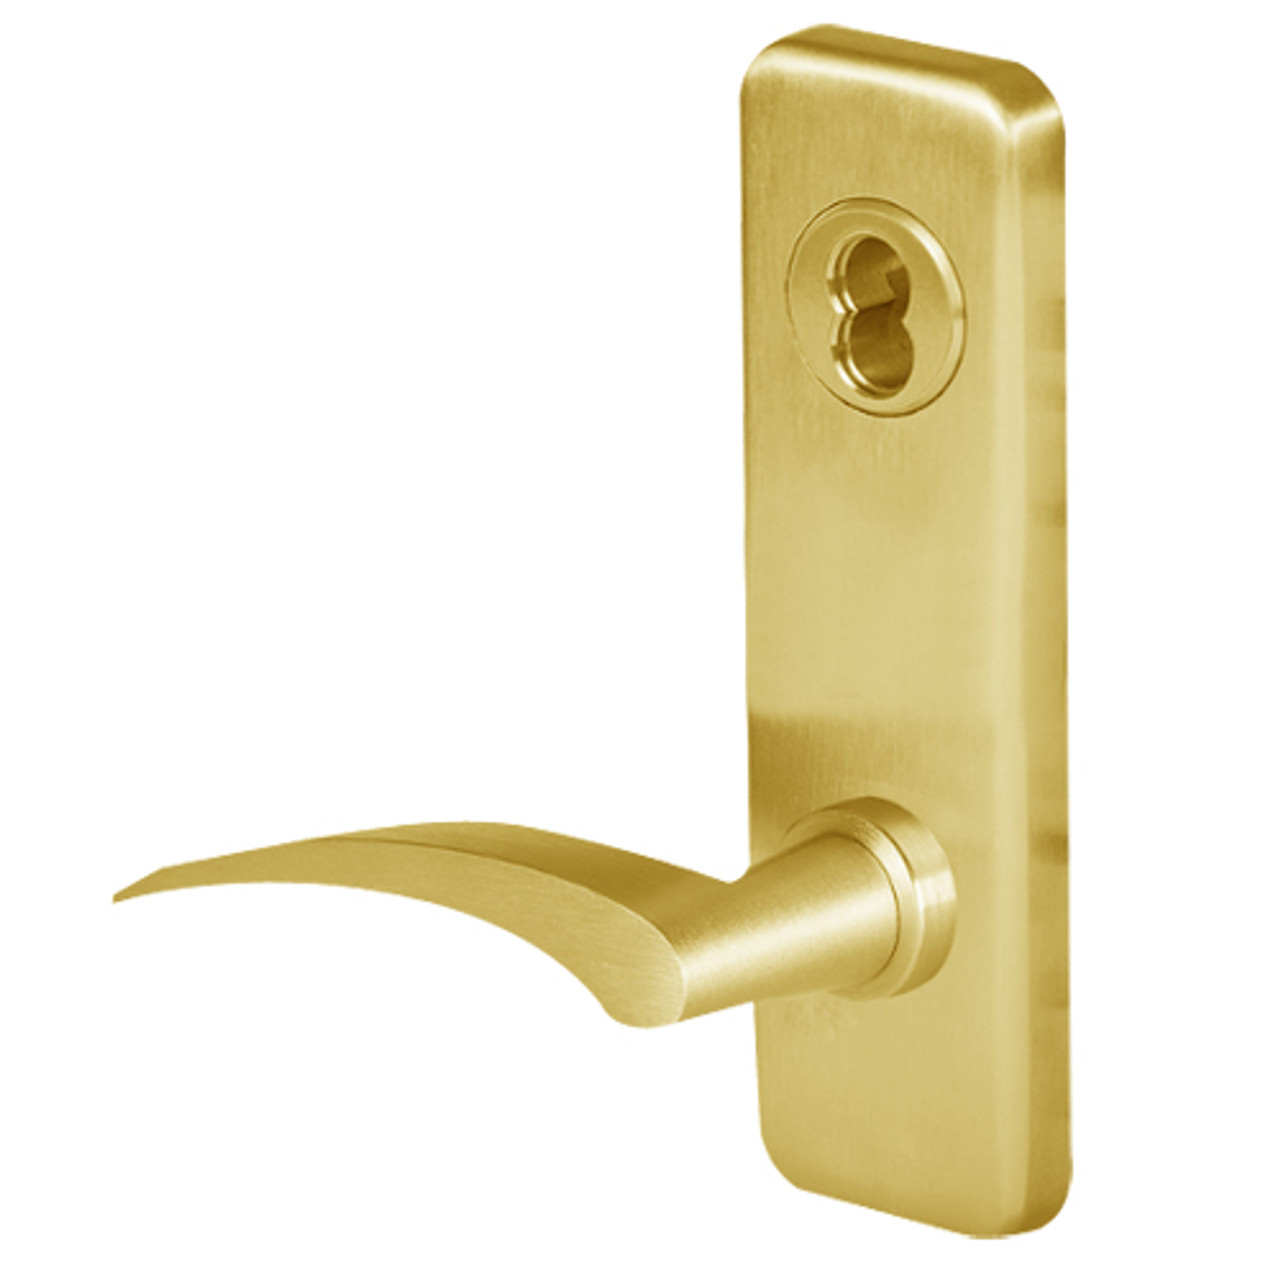 45H0L17RJ605 Best 40H Series Privacy with Deadbolt Heavy Duty Mortise Lever Lock with Gull Wing RH in Bright Brass